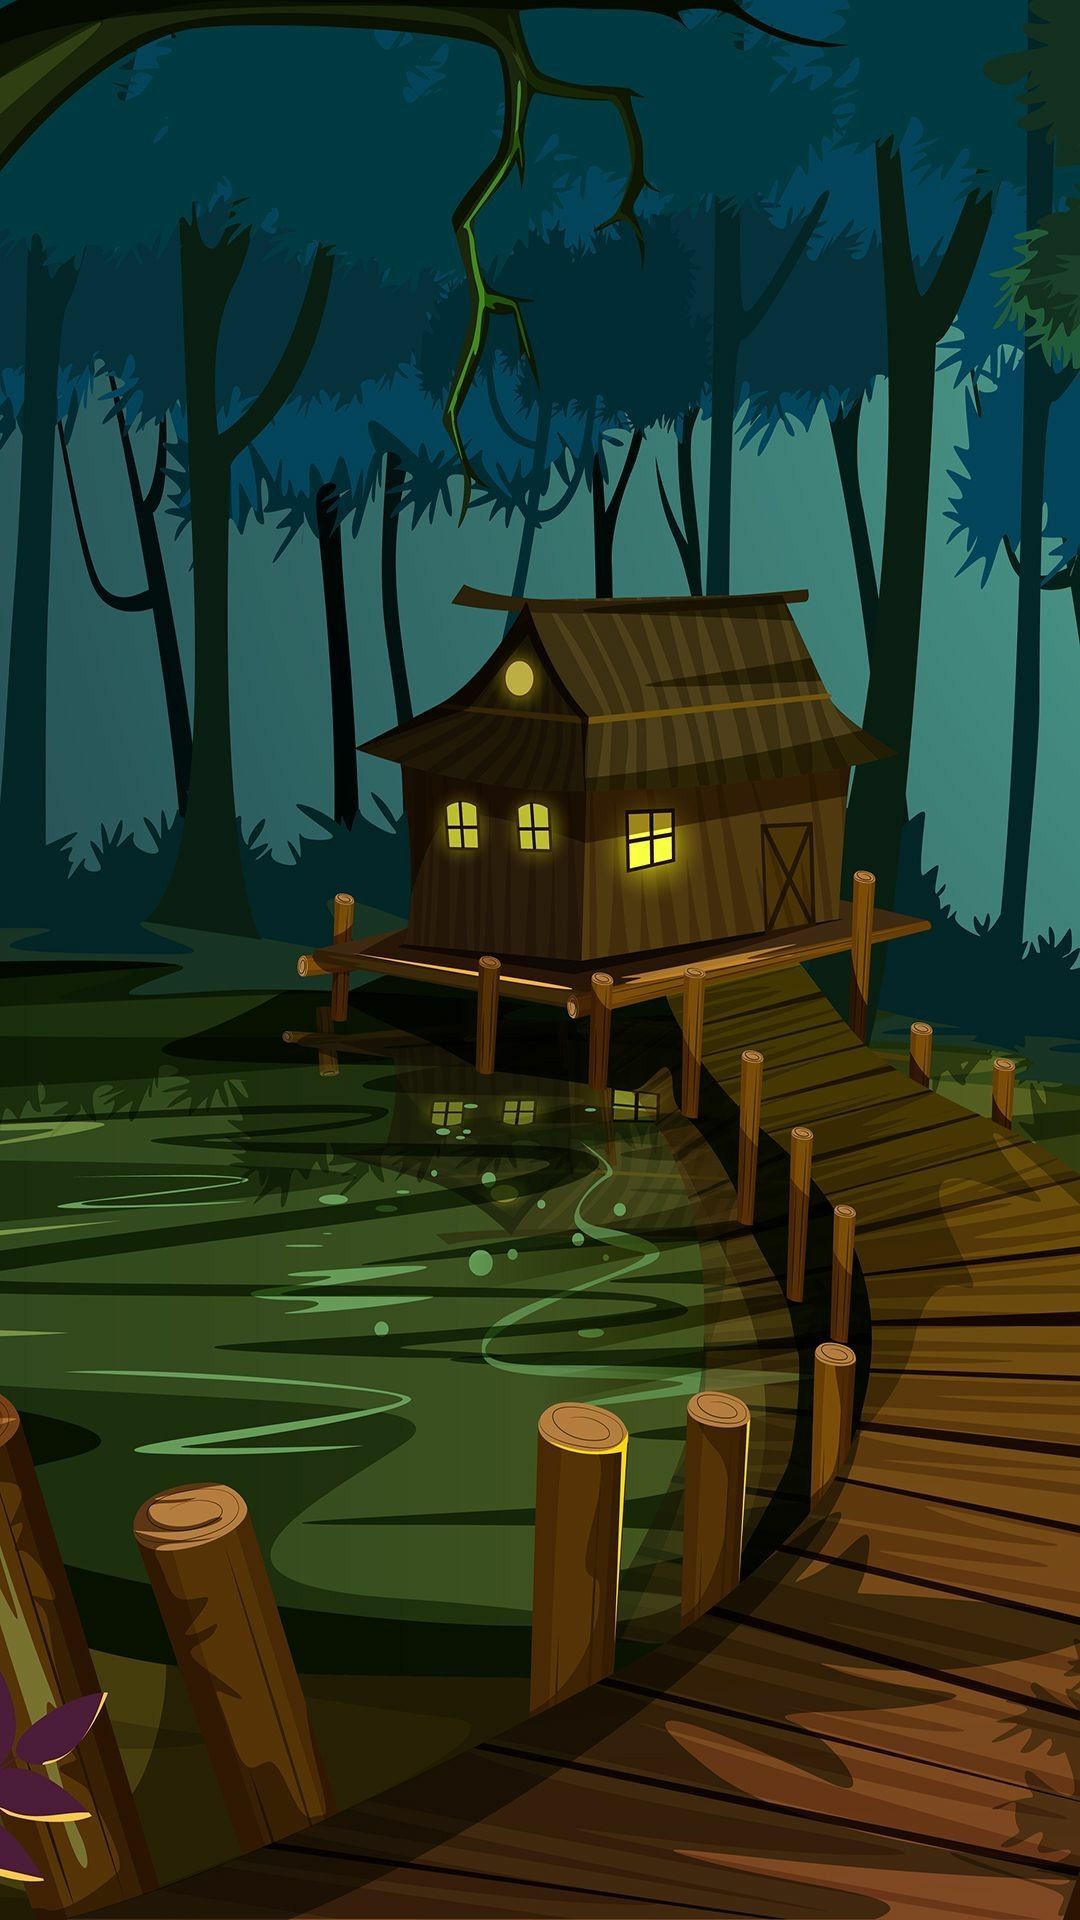 Shack in the swamp house. Cartoon forest and house with a boardwalk digital art. Fantasy art landscapes, Artistic wallpaper, Landscape wallpaper